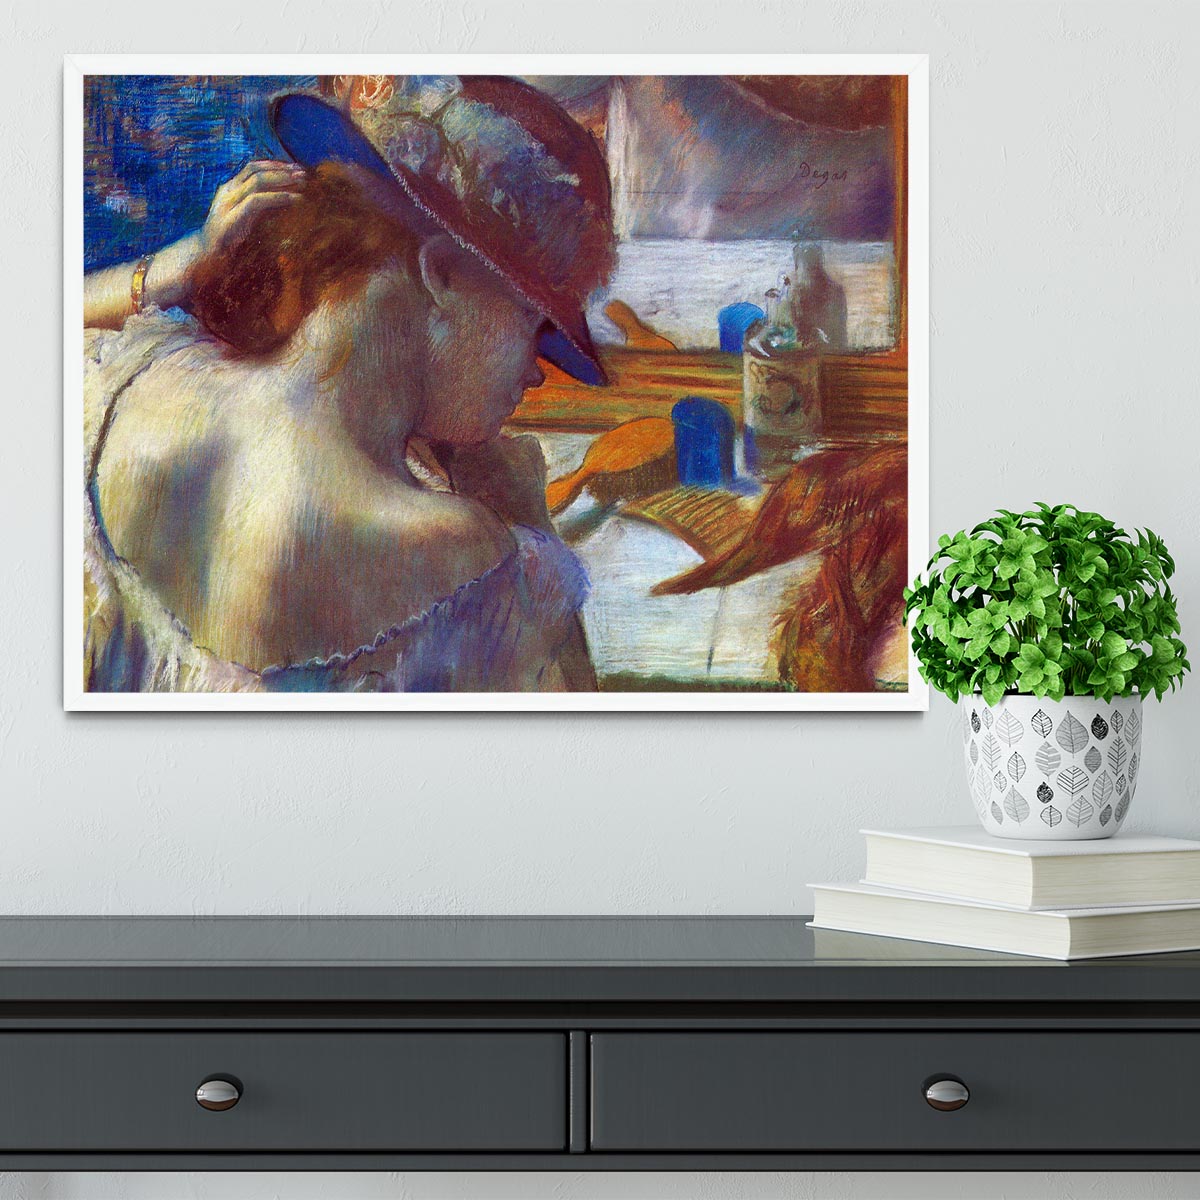 Before the mirror by Degas Framed Print - Canvas Art Rocks -6